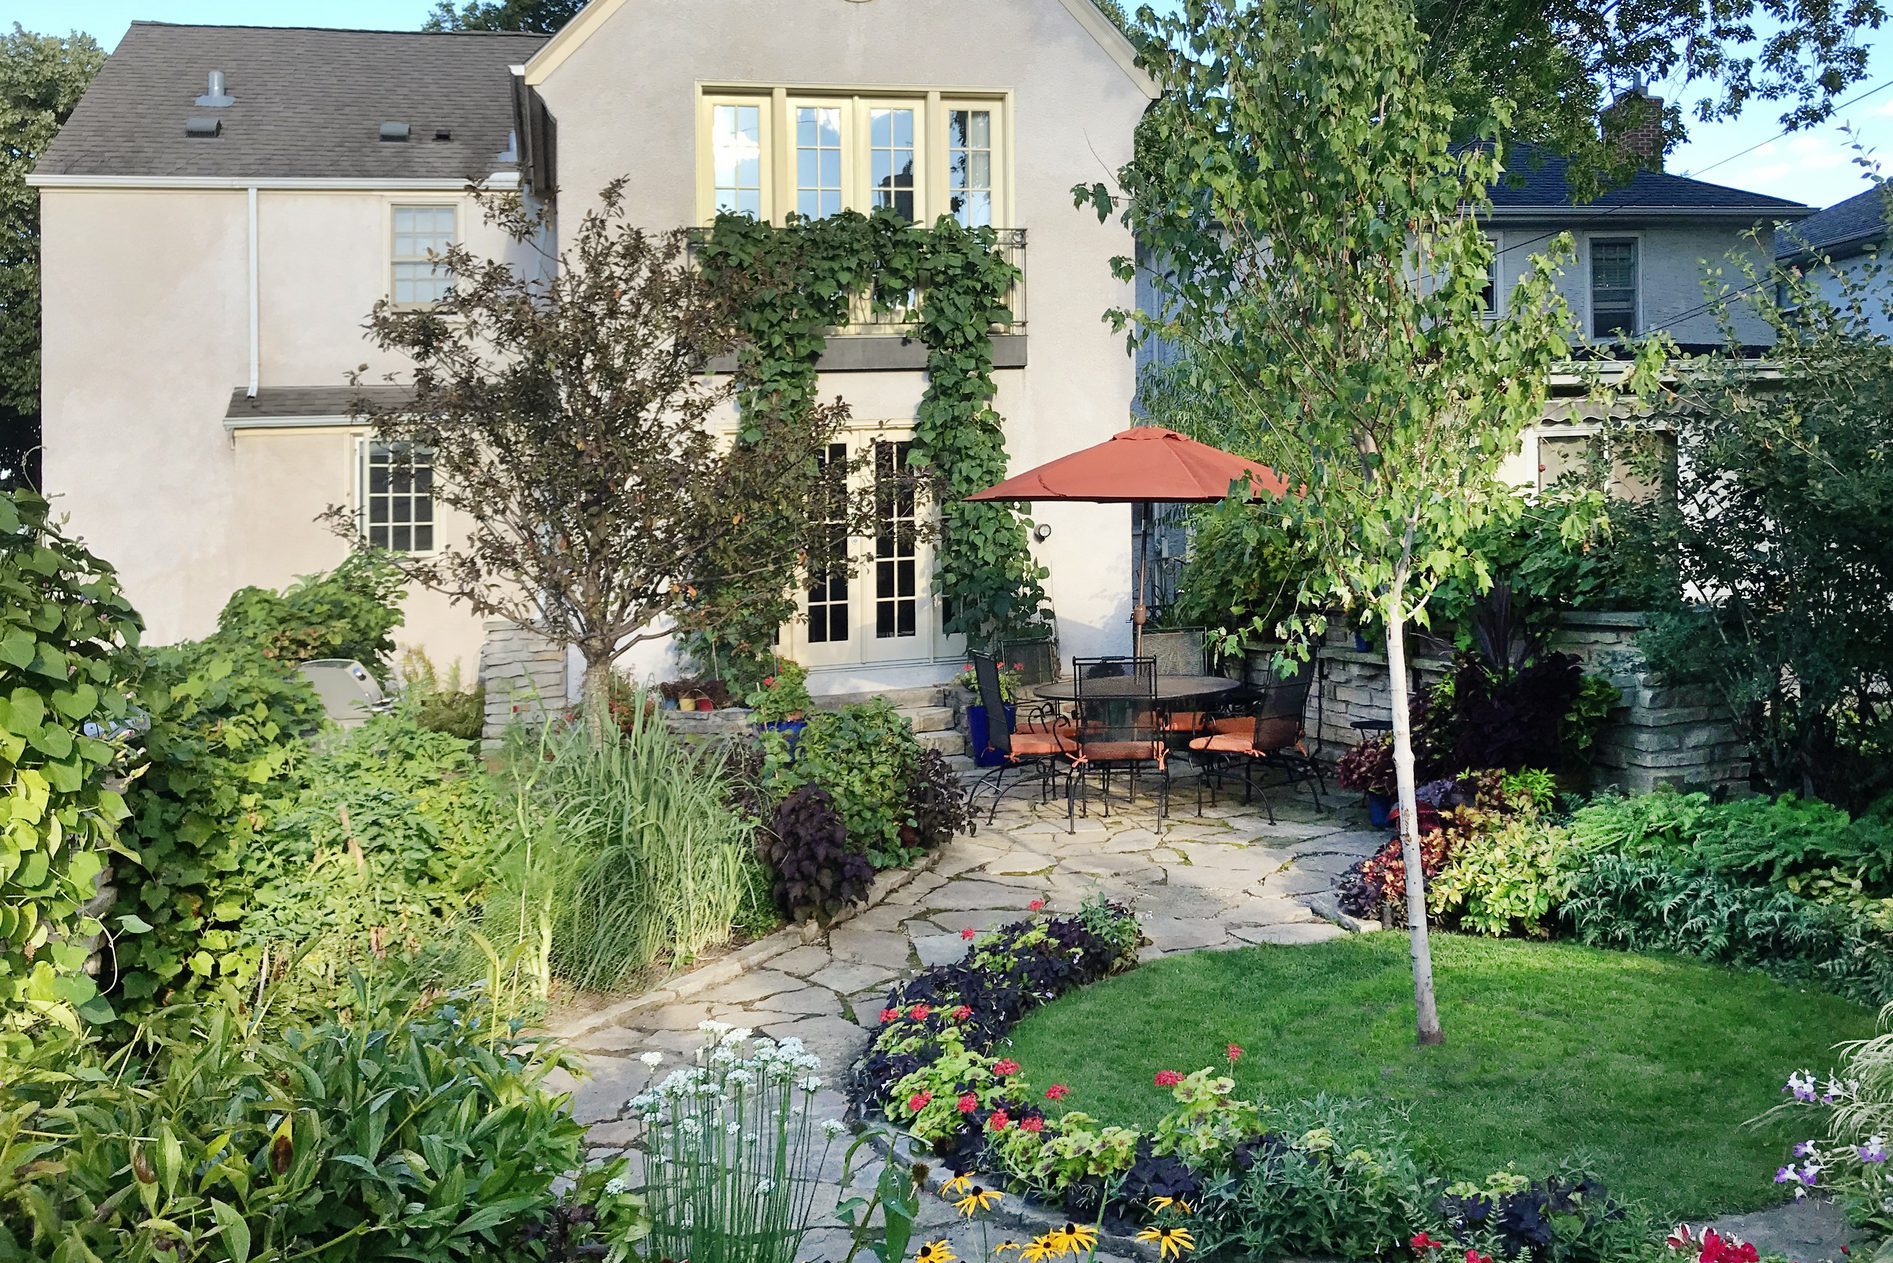 Backyard Garden Patio of Residential Home in Midwest, Minnesota, USA